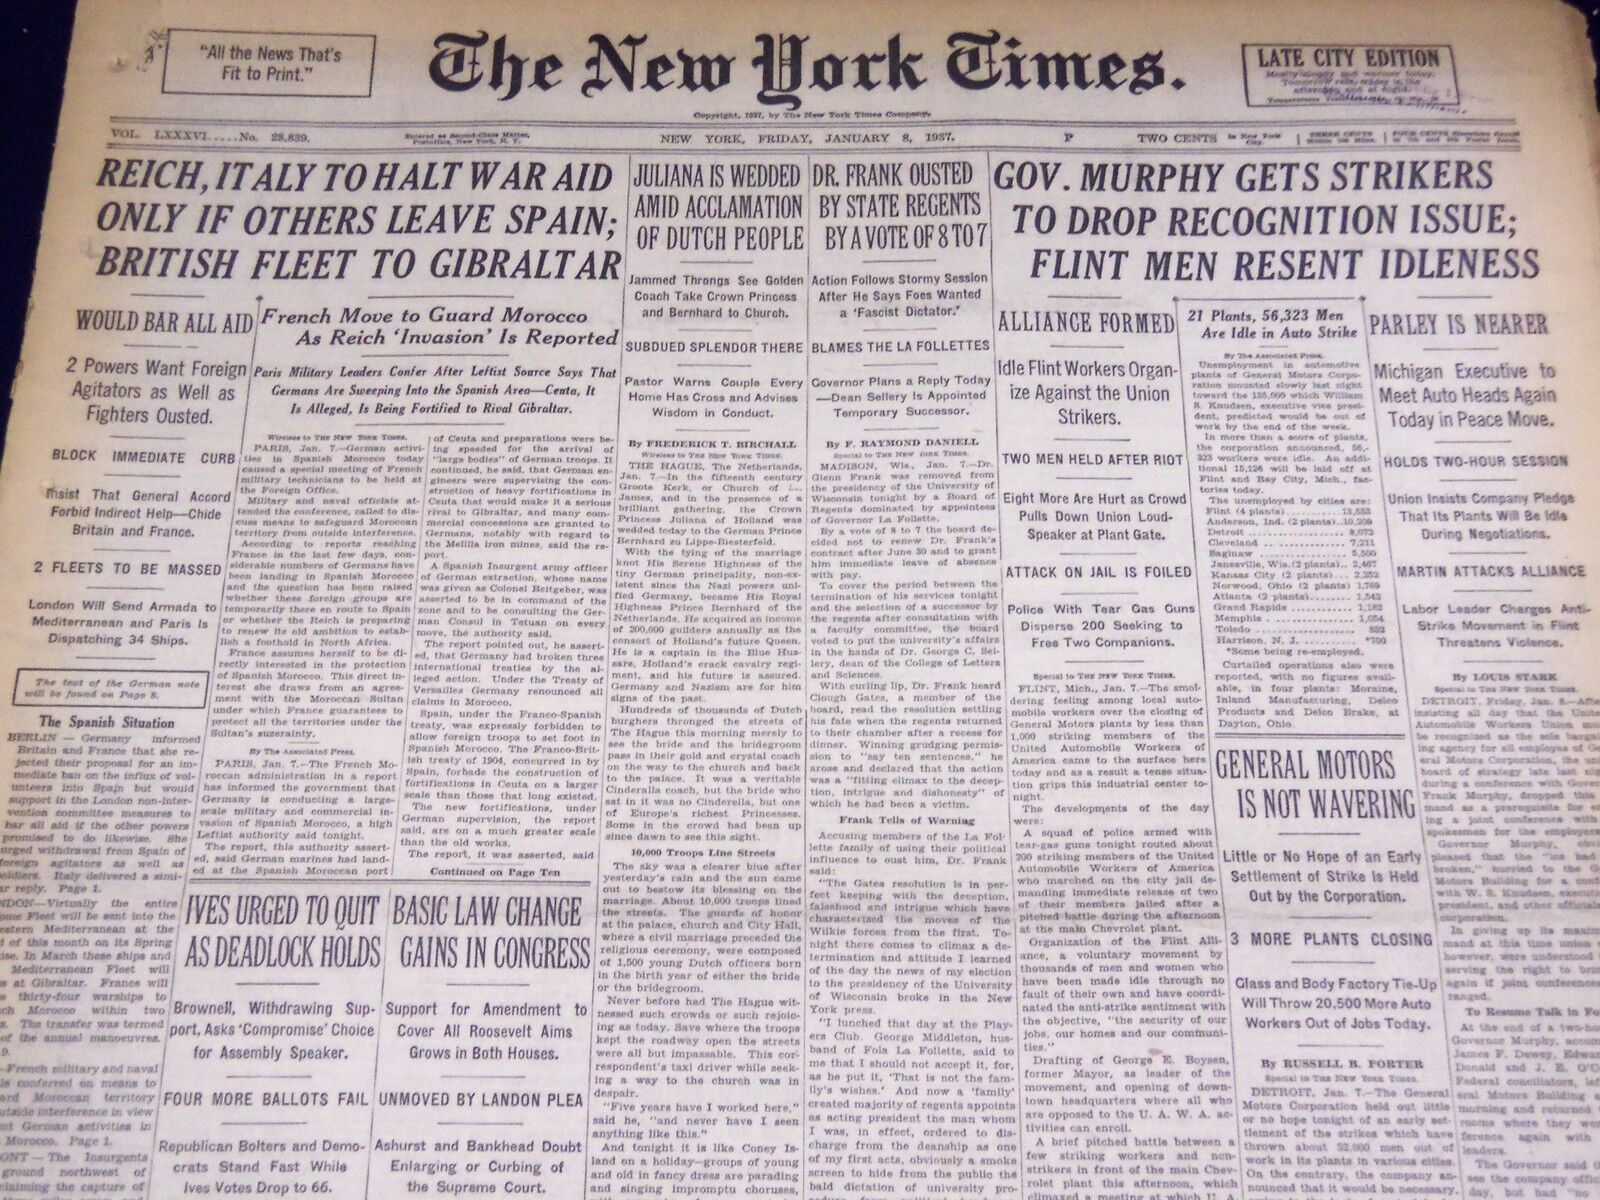 1937 JANUARY 8 NEW YORK TIMES - REICH, ITALY TO HALT WAR AID - NT 2771